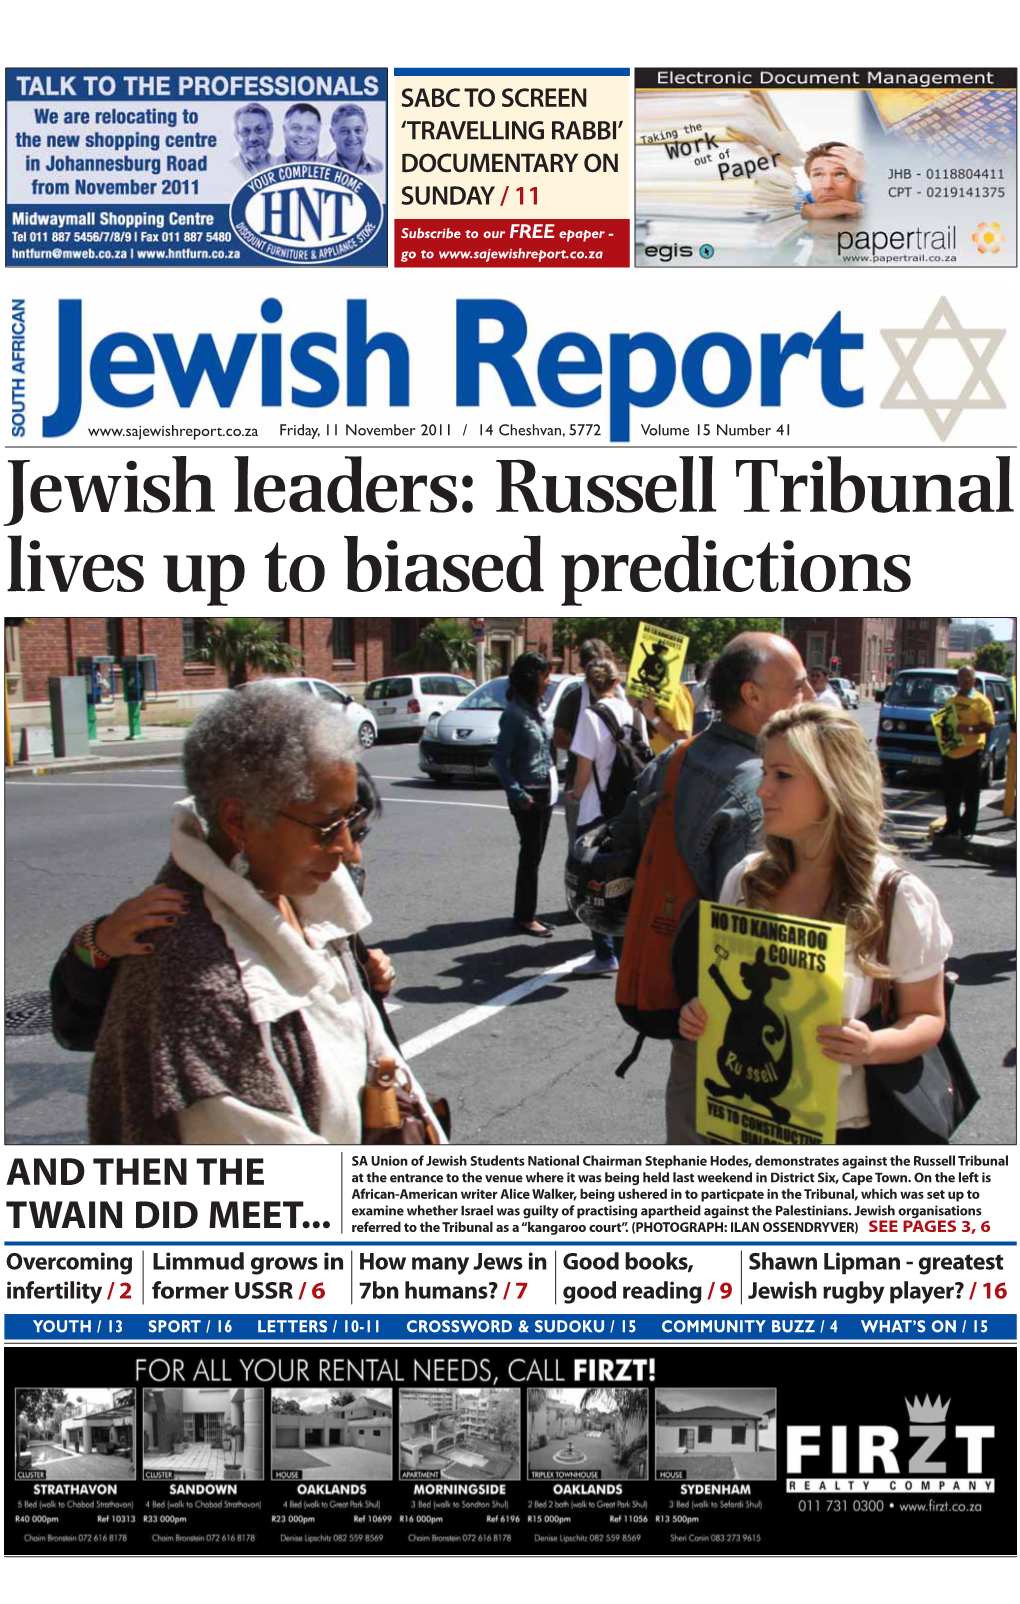 11 November 2011 / 14 Cheshvan, 5772 Volume 15 Number 41 Jewish Leaders: Russell Tribunal Lives up to Biased Predictions